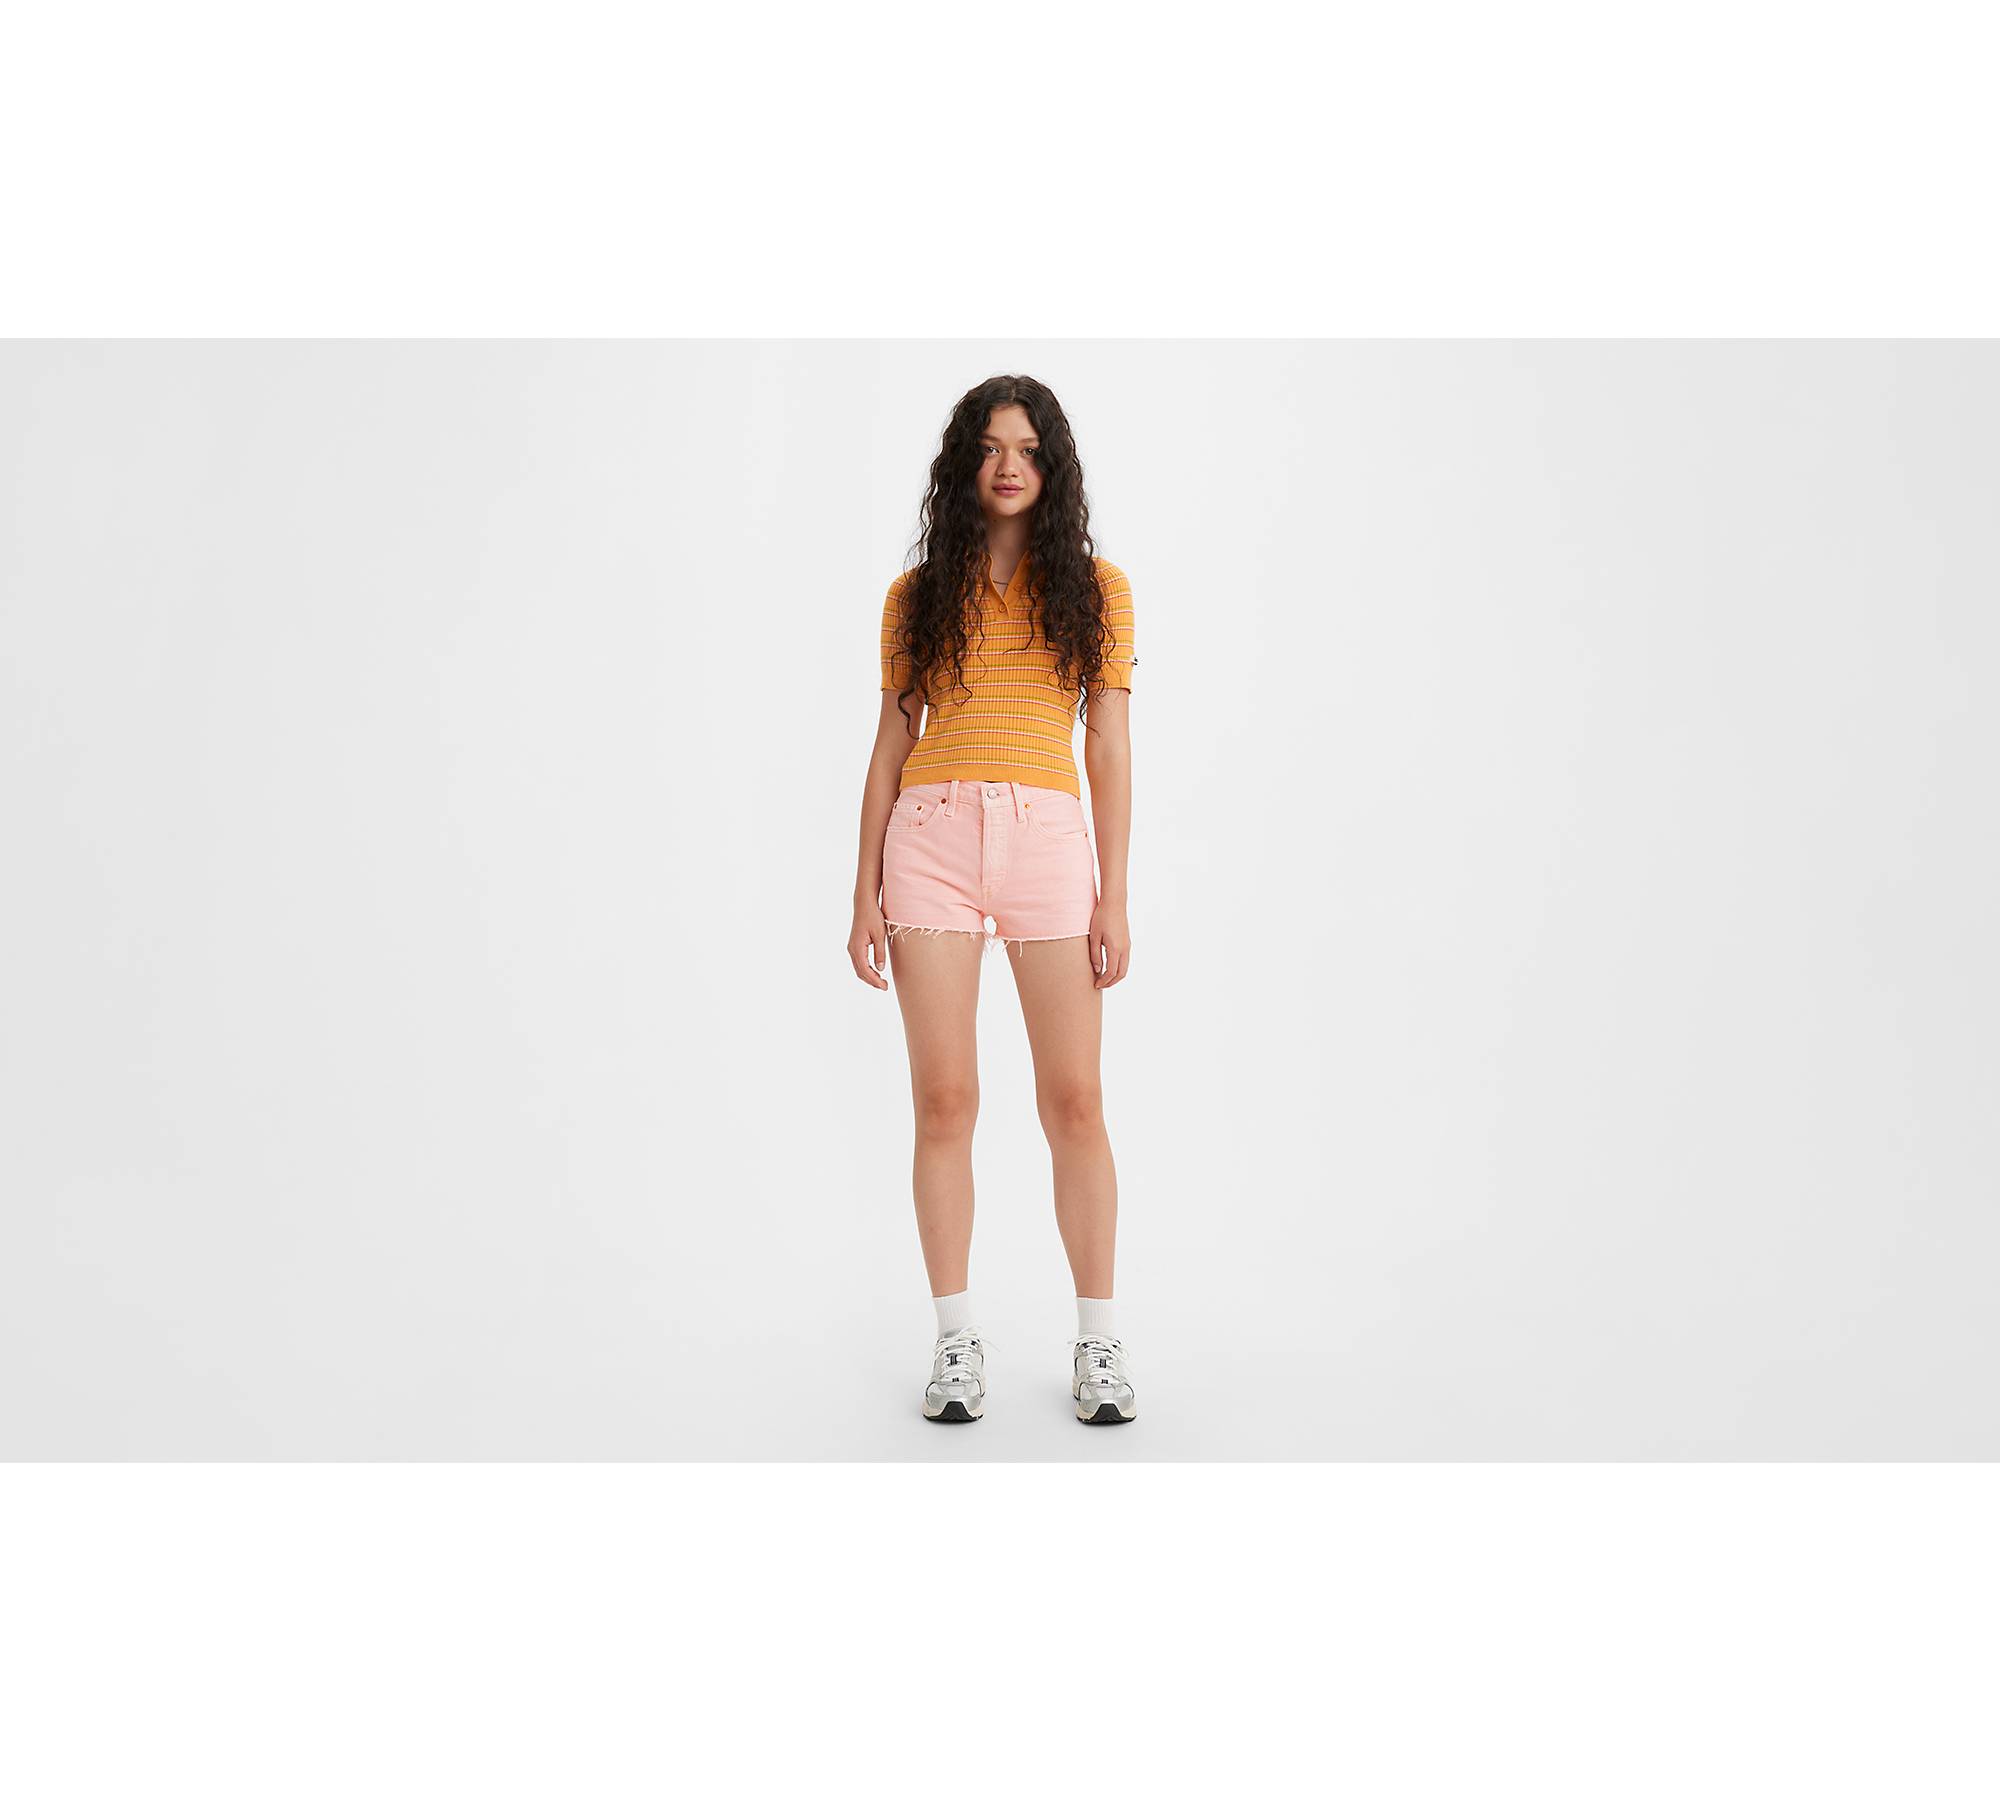 Level 7 Jeans Relaxed Fit Bleach Dye Denim Shorts on SALE